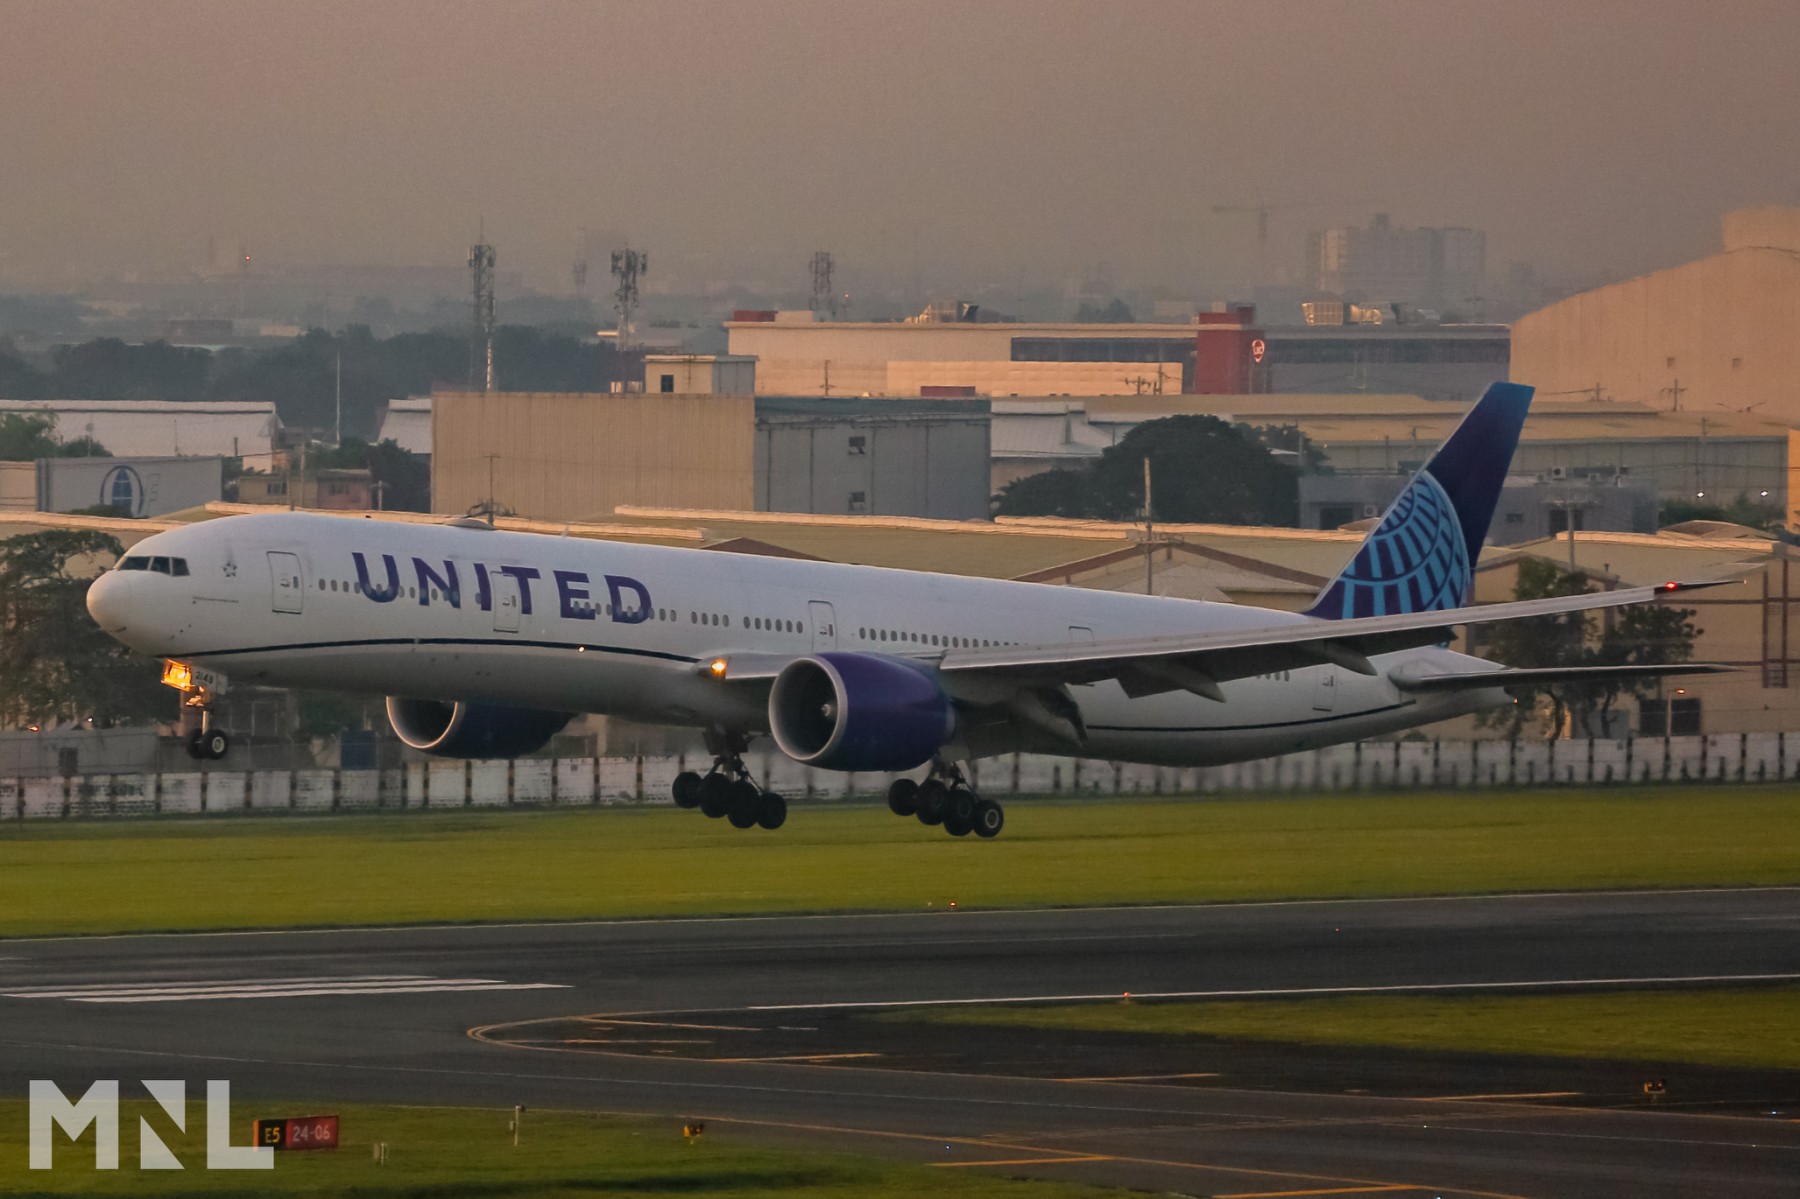 United Airlines nonstop US-PH